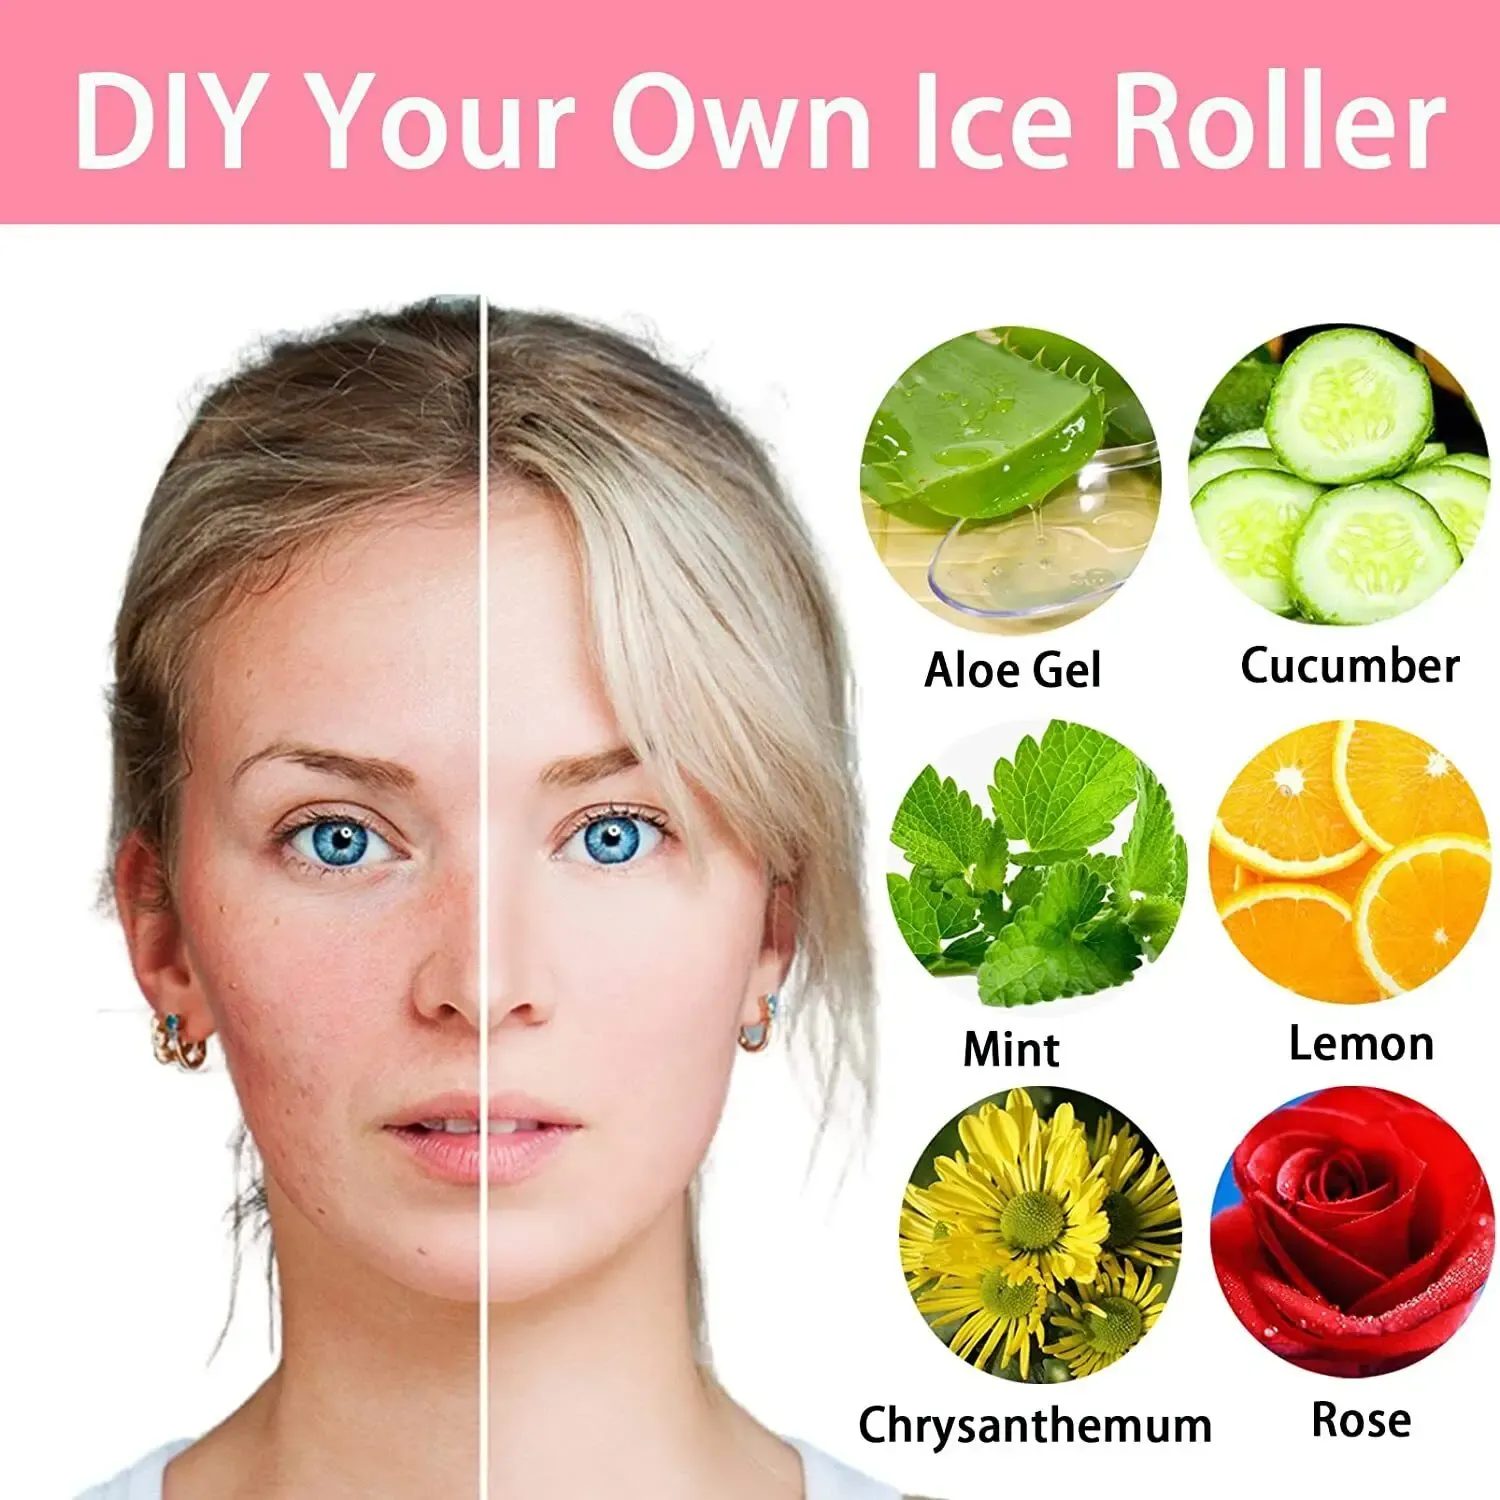 Silicone Ice Cube Trays Ice Massage Cups Face Massager Roller Reduce Acne Shrink Pores Skin Care Beauty Lifting Contouring Tools